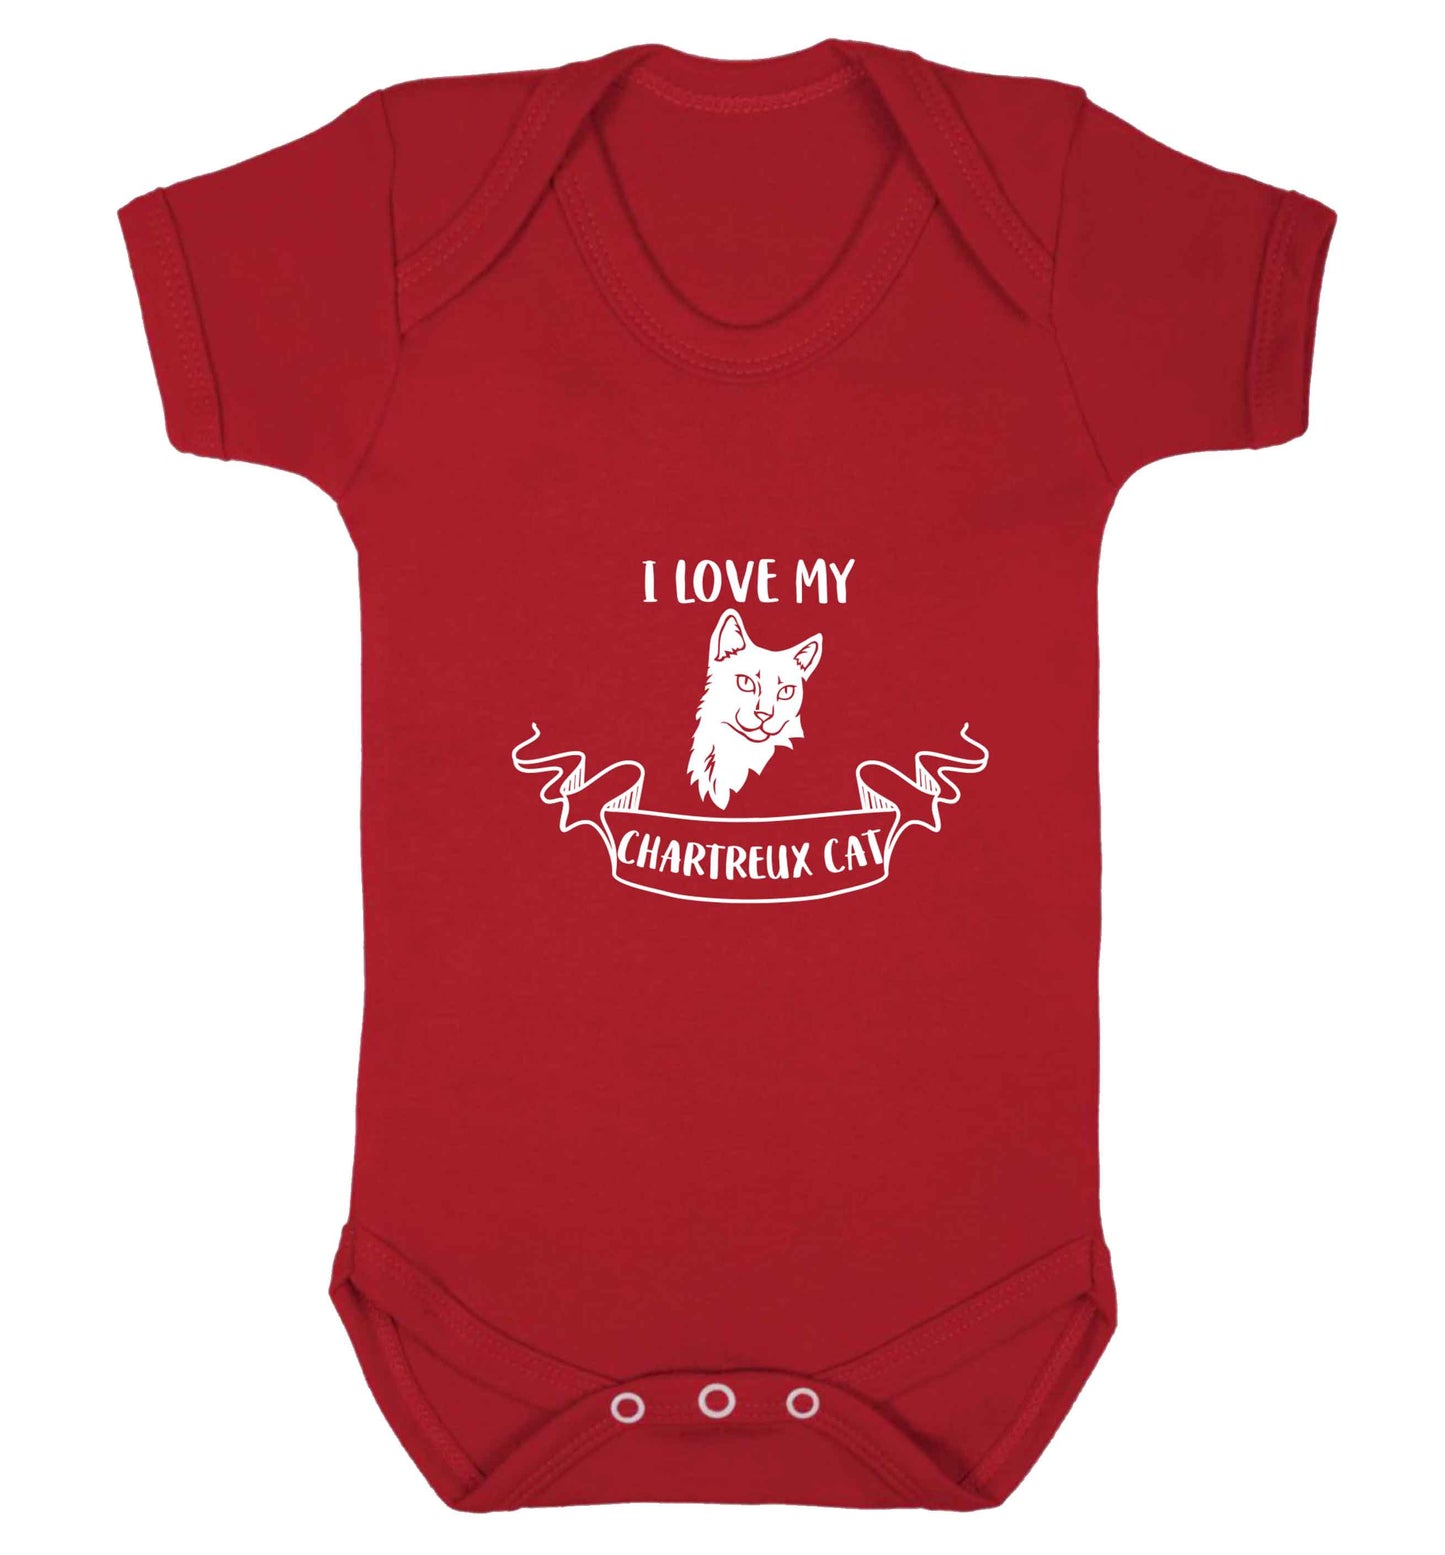 I love my chartreux cat baby vest red 18-24 months